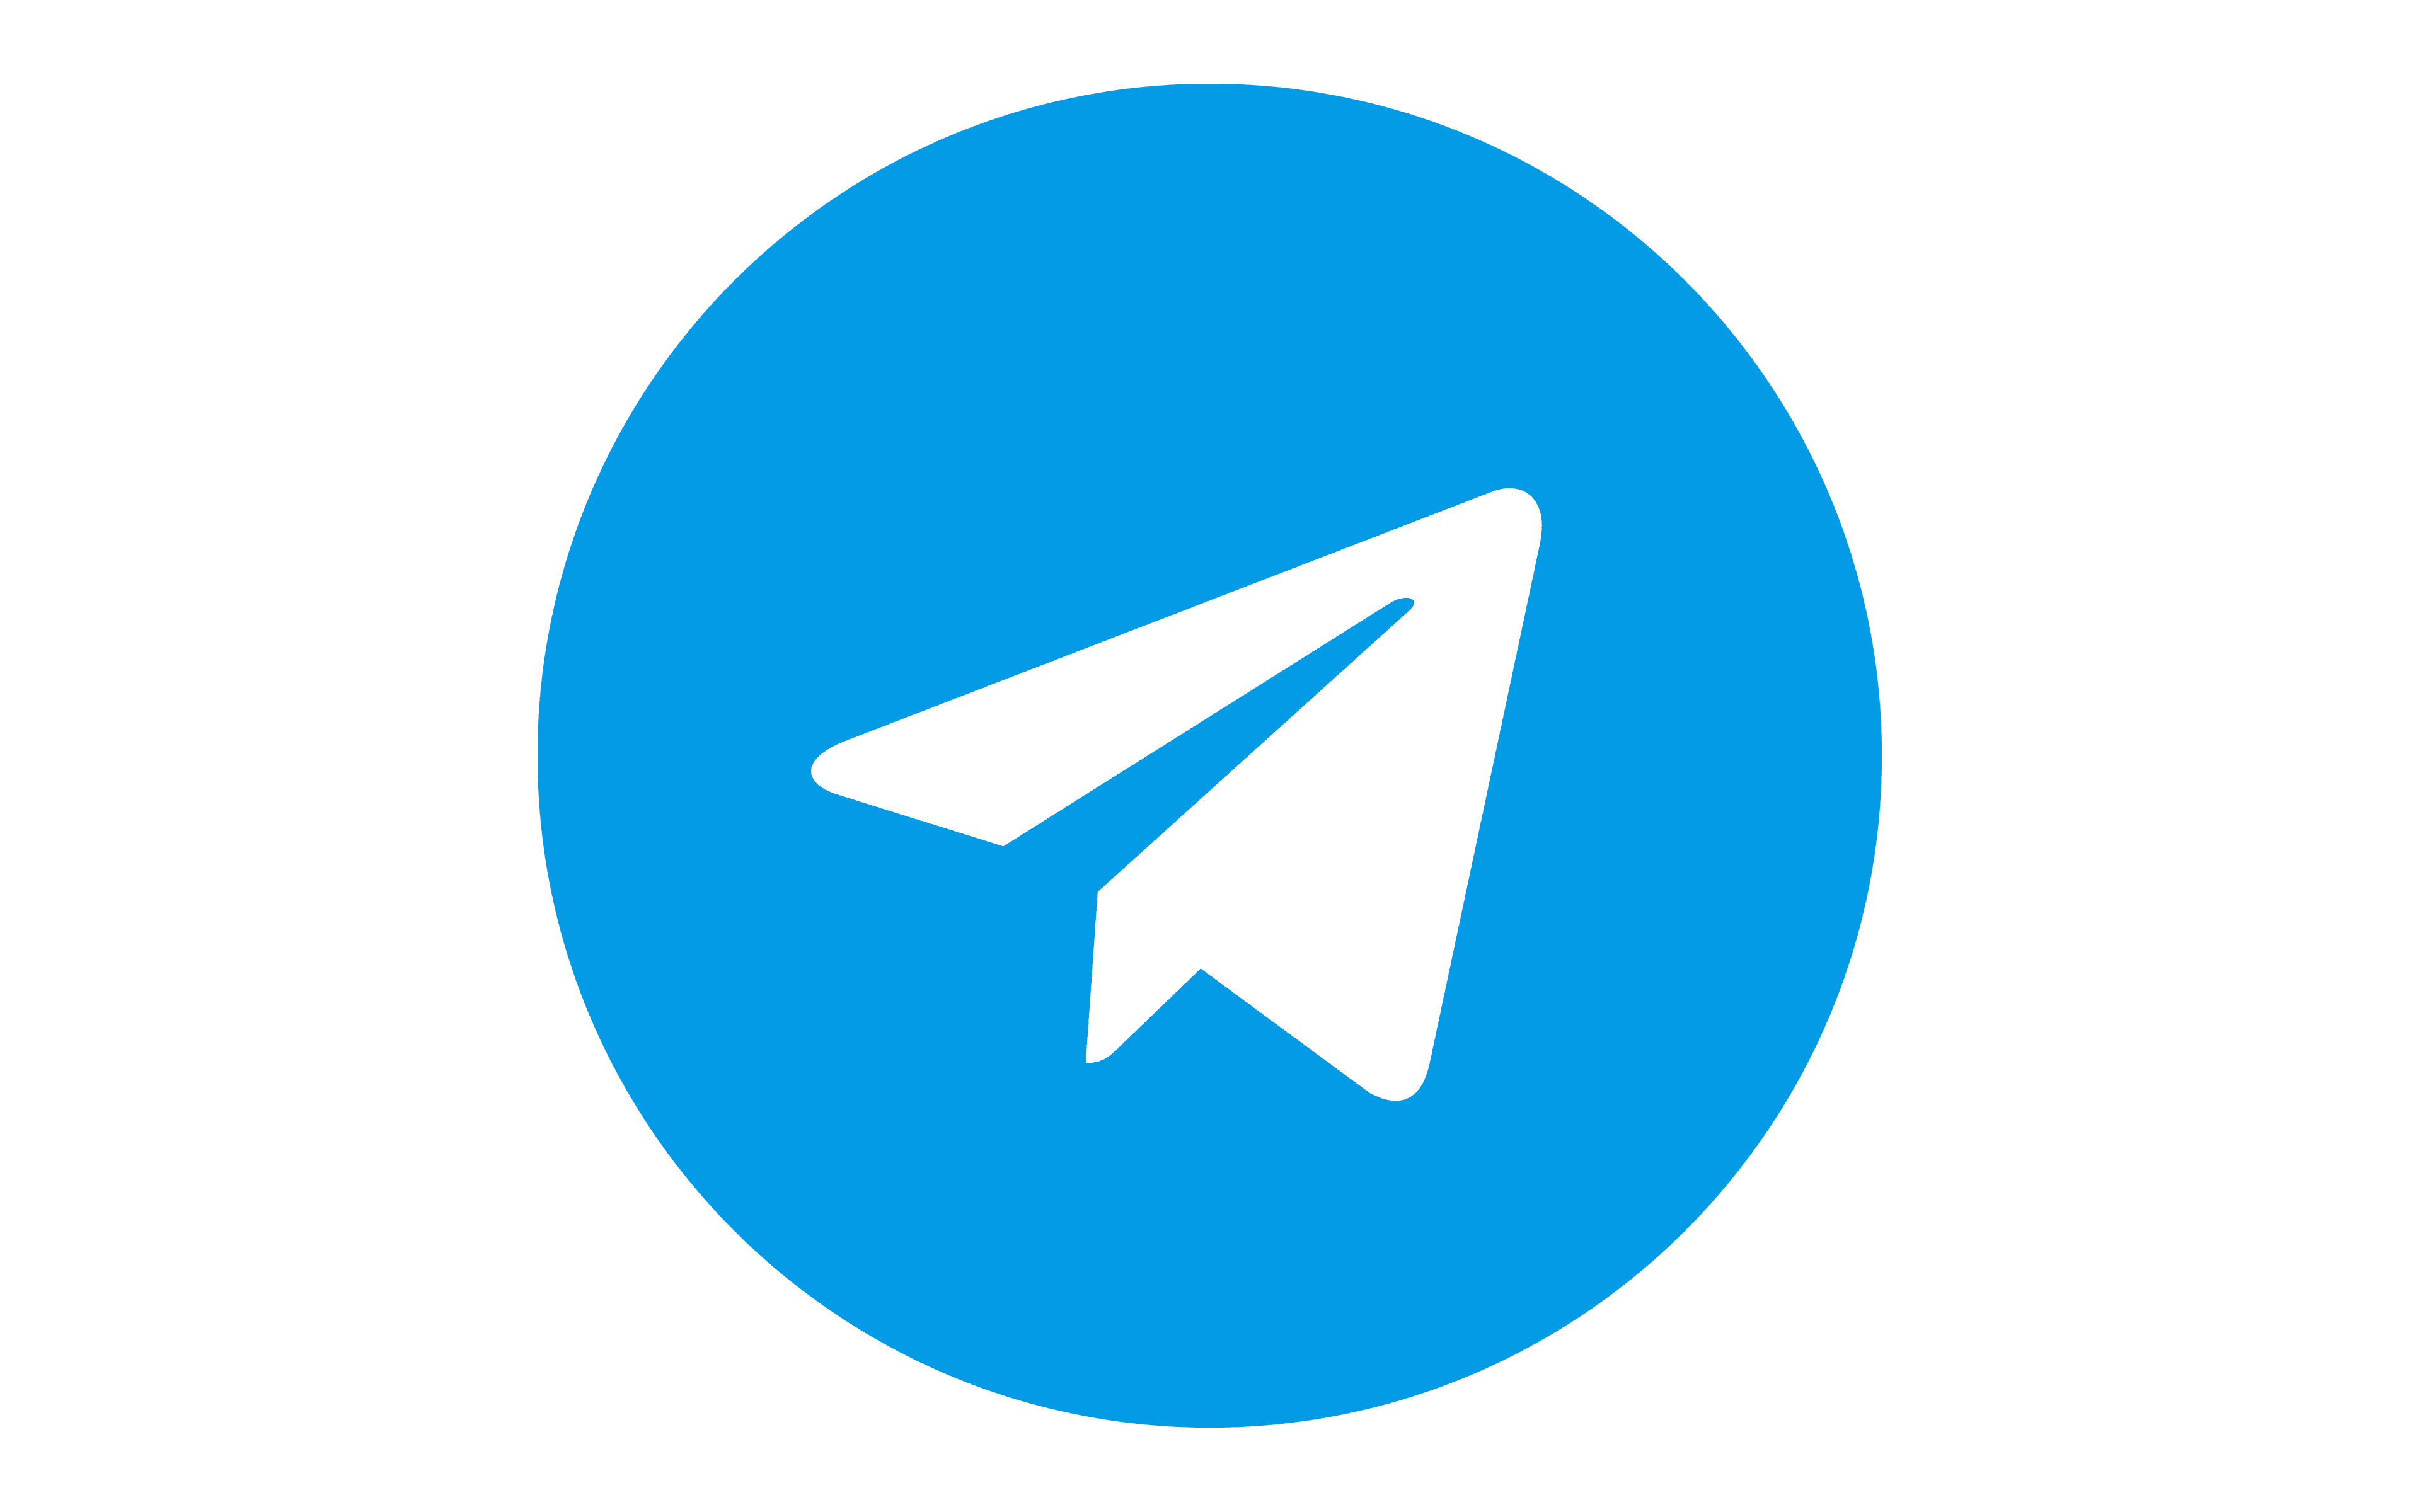 700M Users Of Telegram Can Now Buy, Receive, Withdraw and Trade Bitcoin P2P